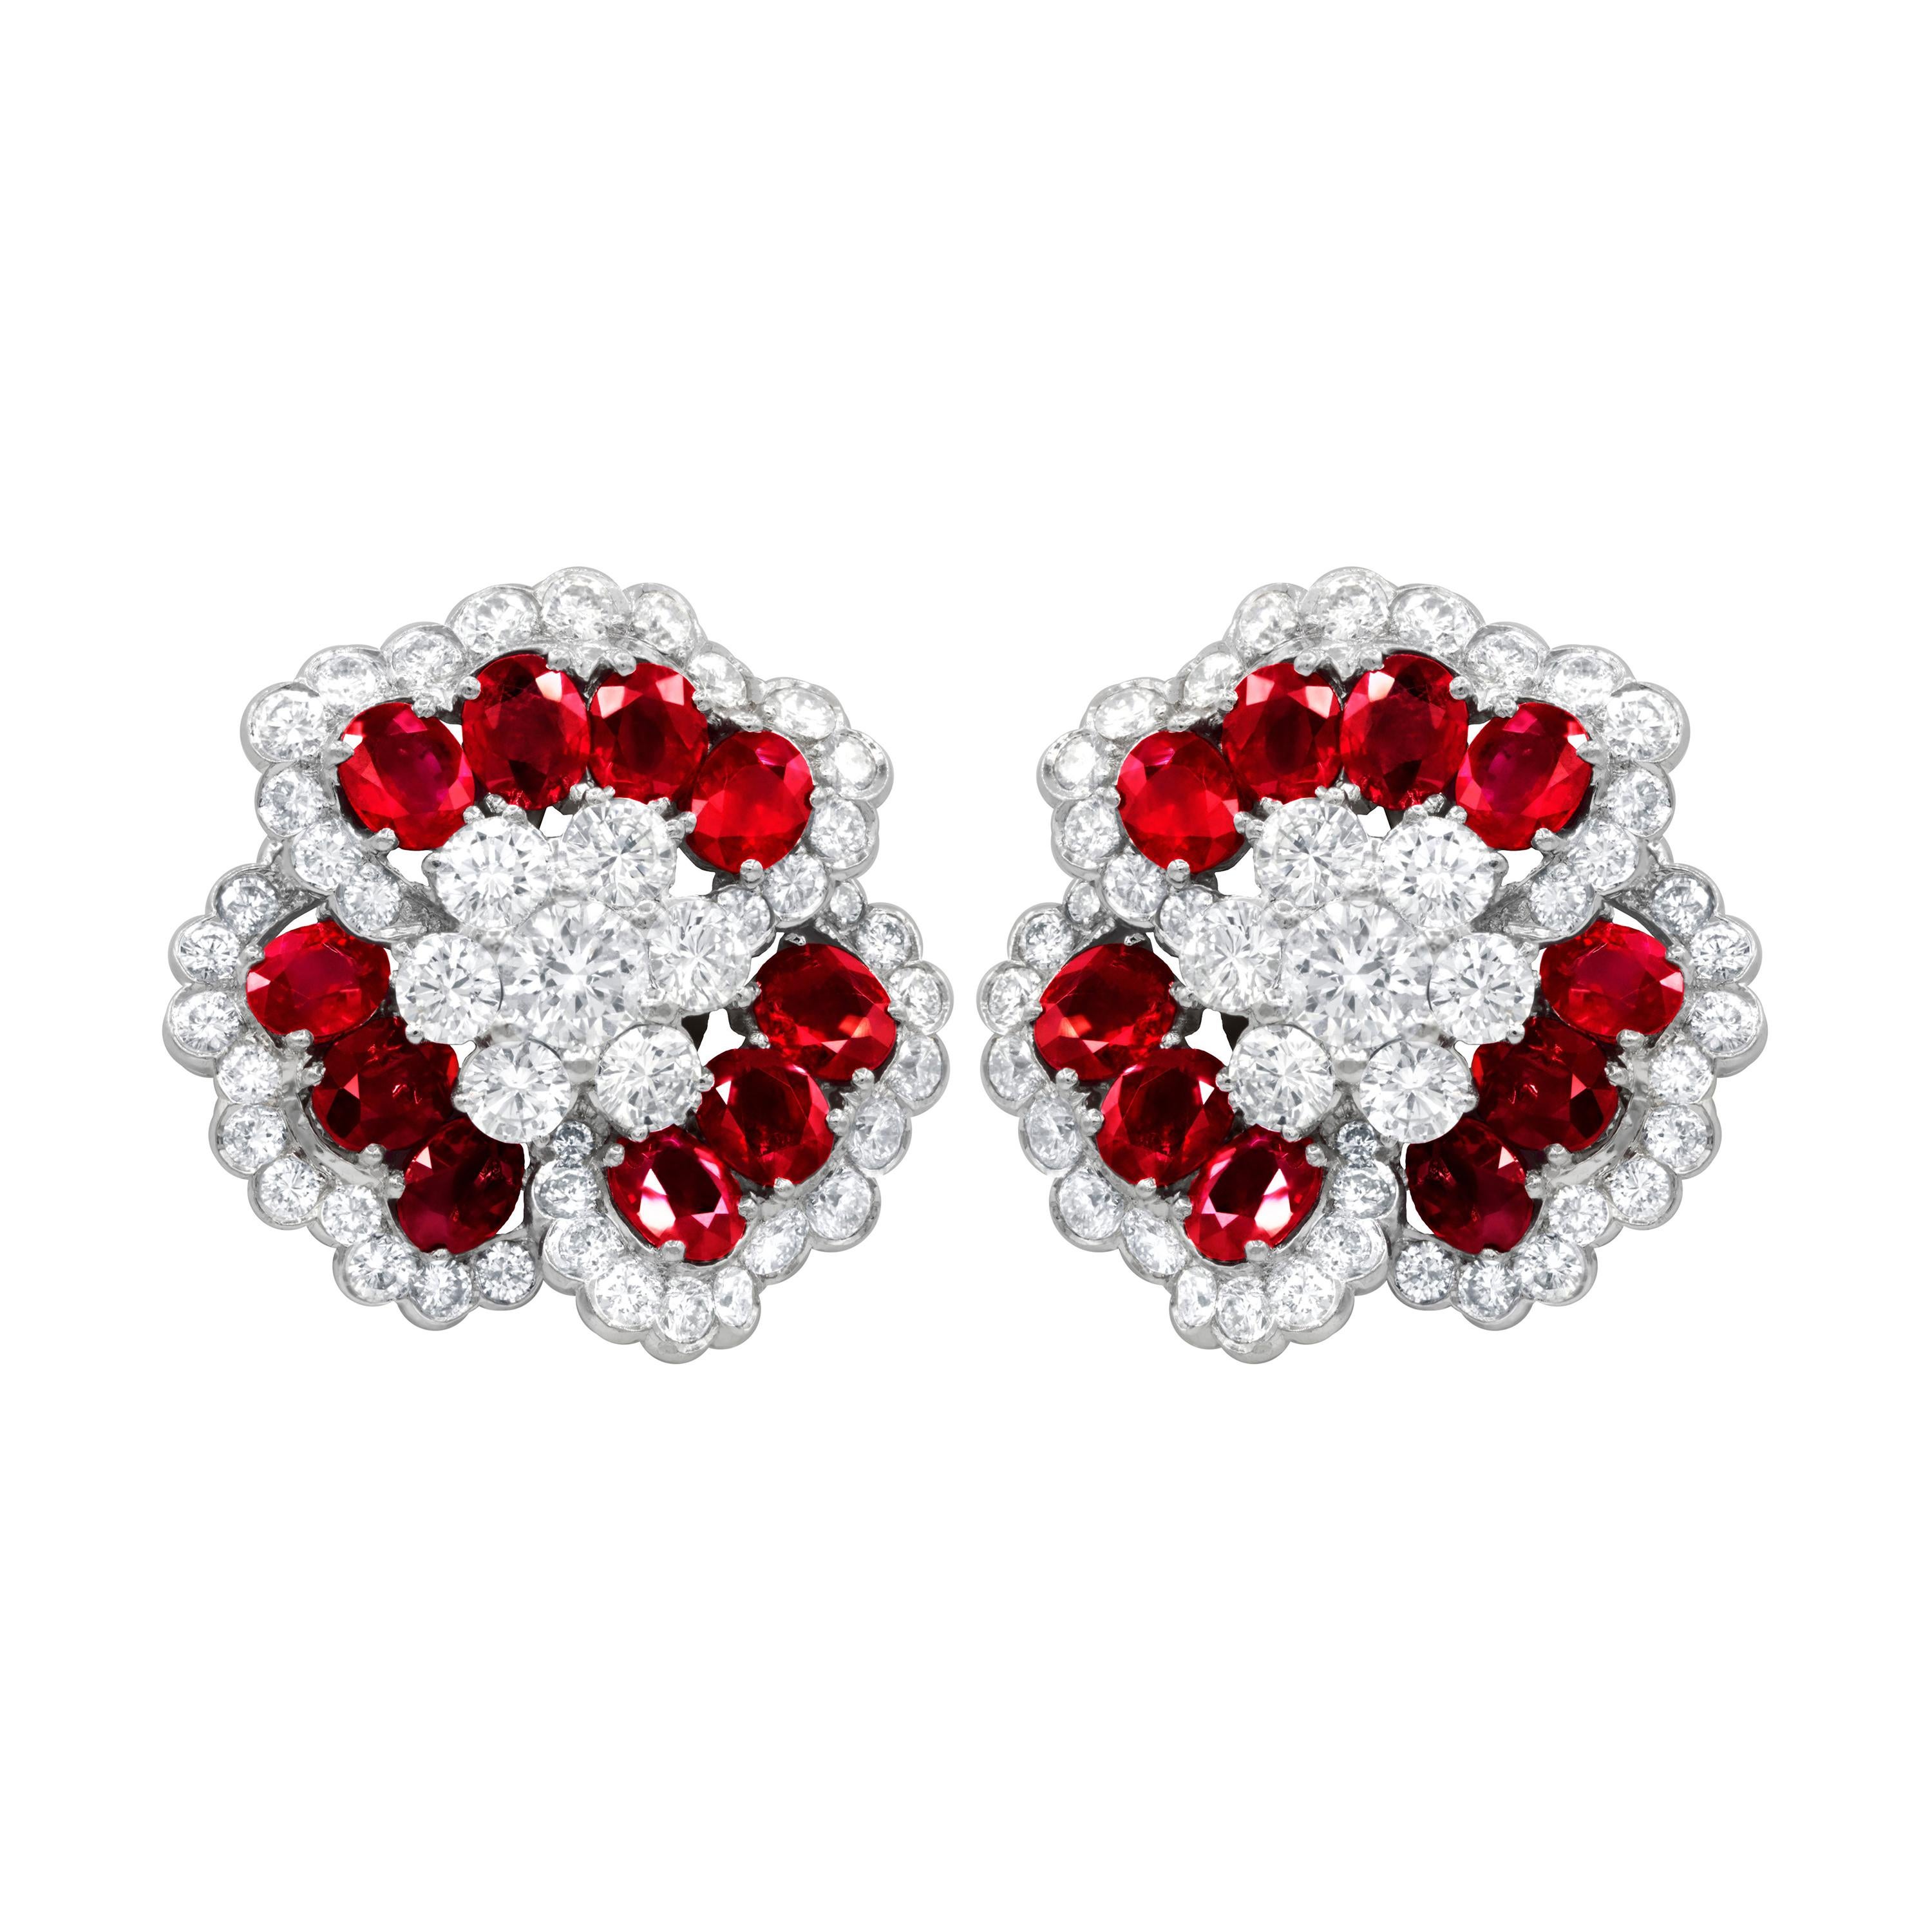 Diana M. Platinum Earrings with Rubies and Diamonds